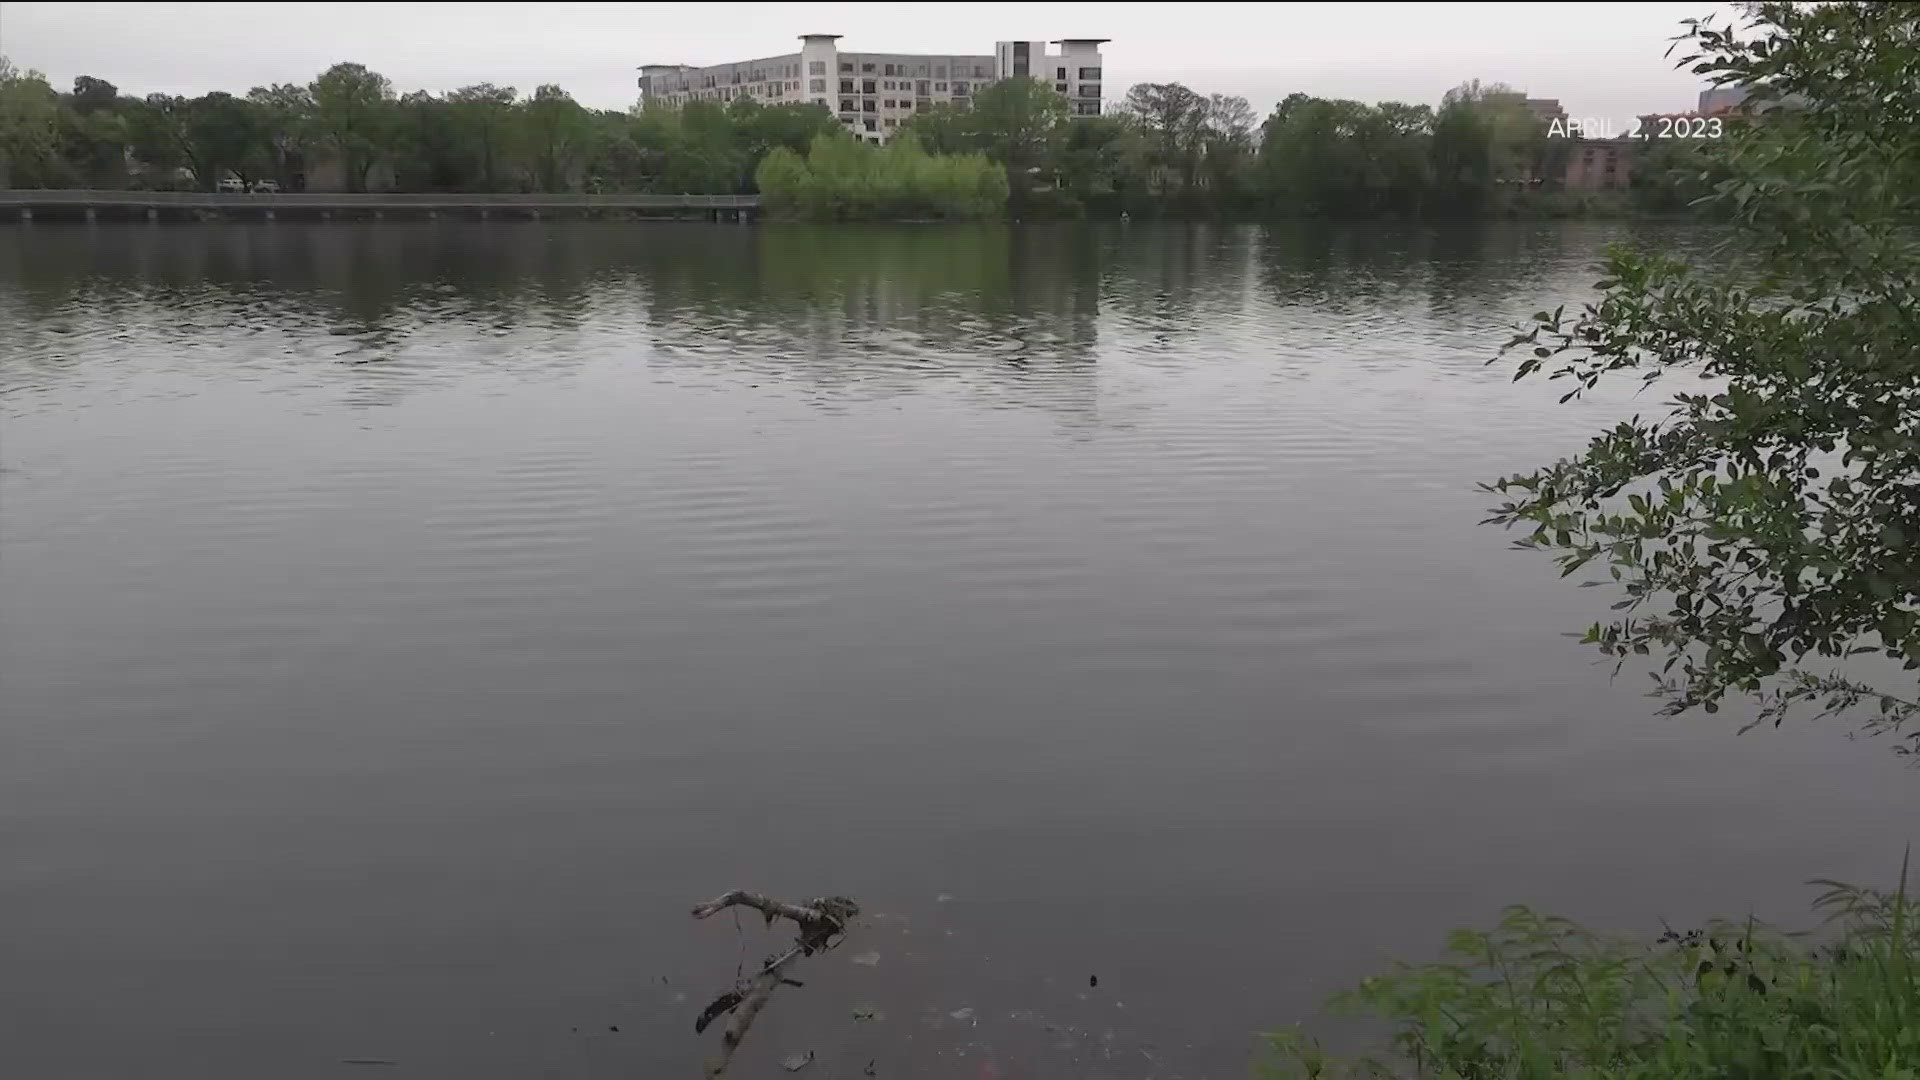 This year, two men have been found dead in the lake after spending a night out on Rainey Street.